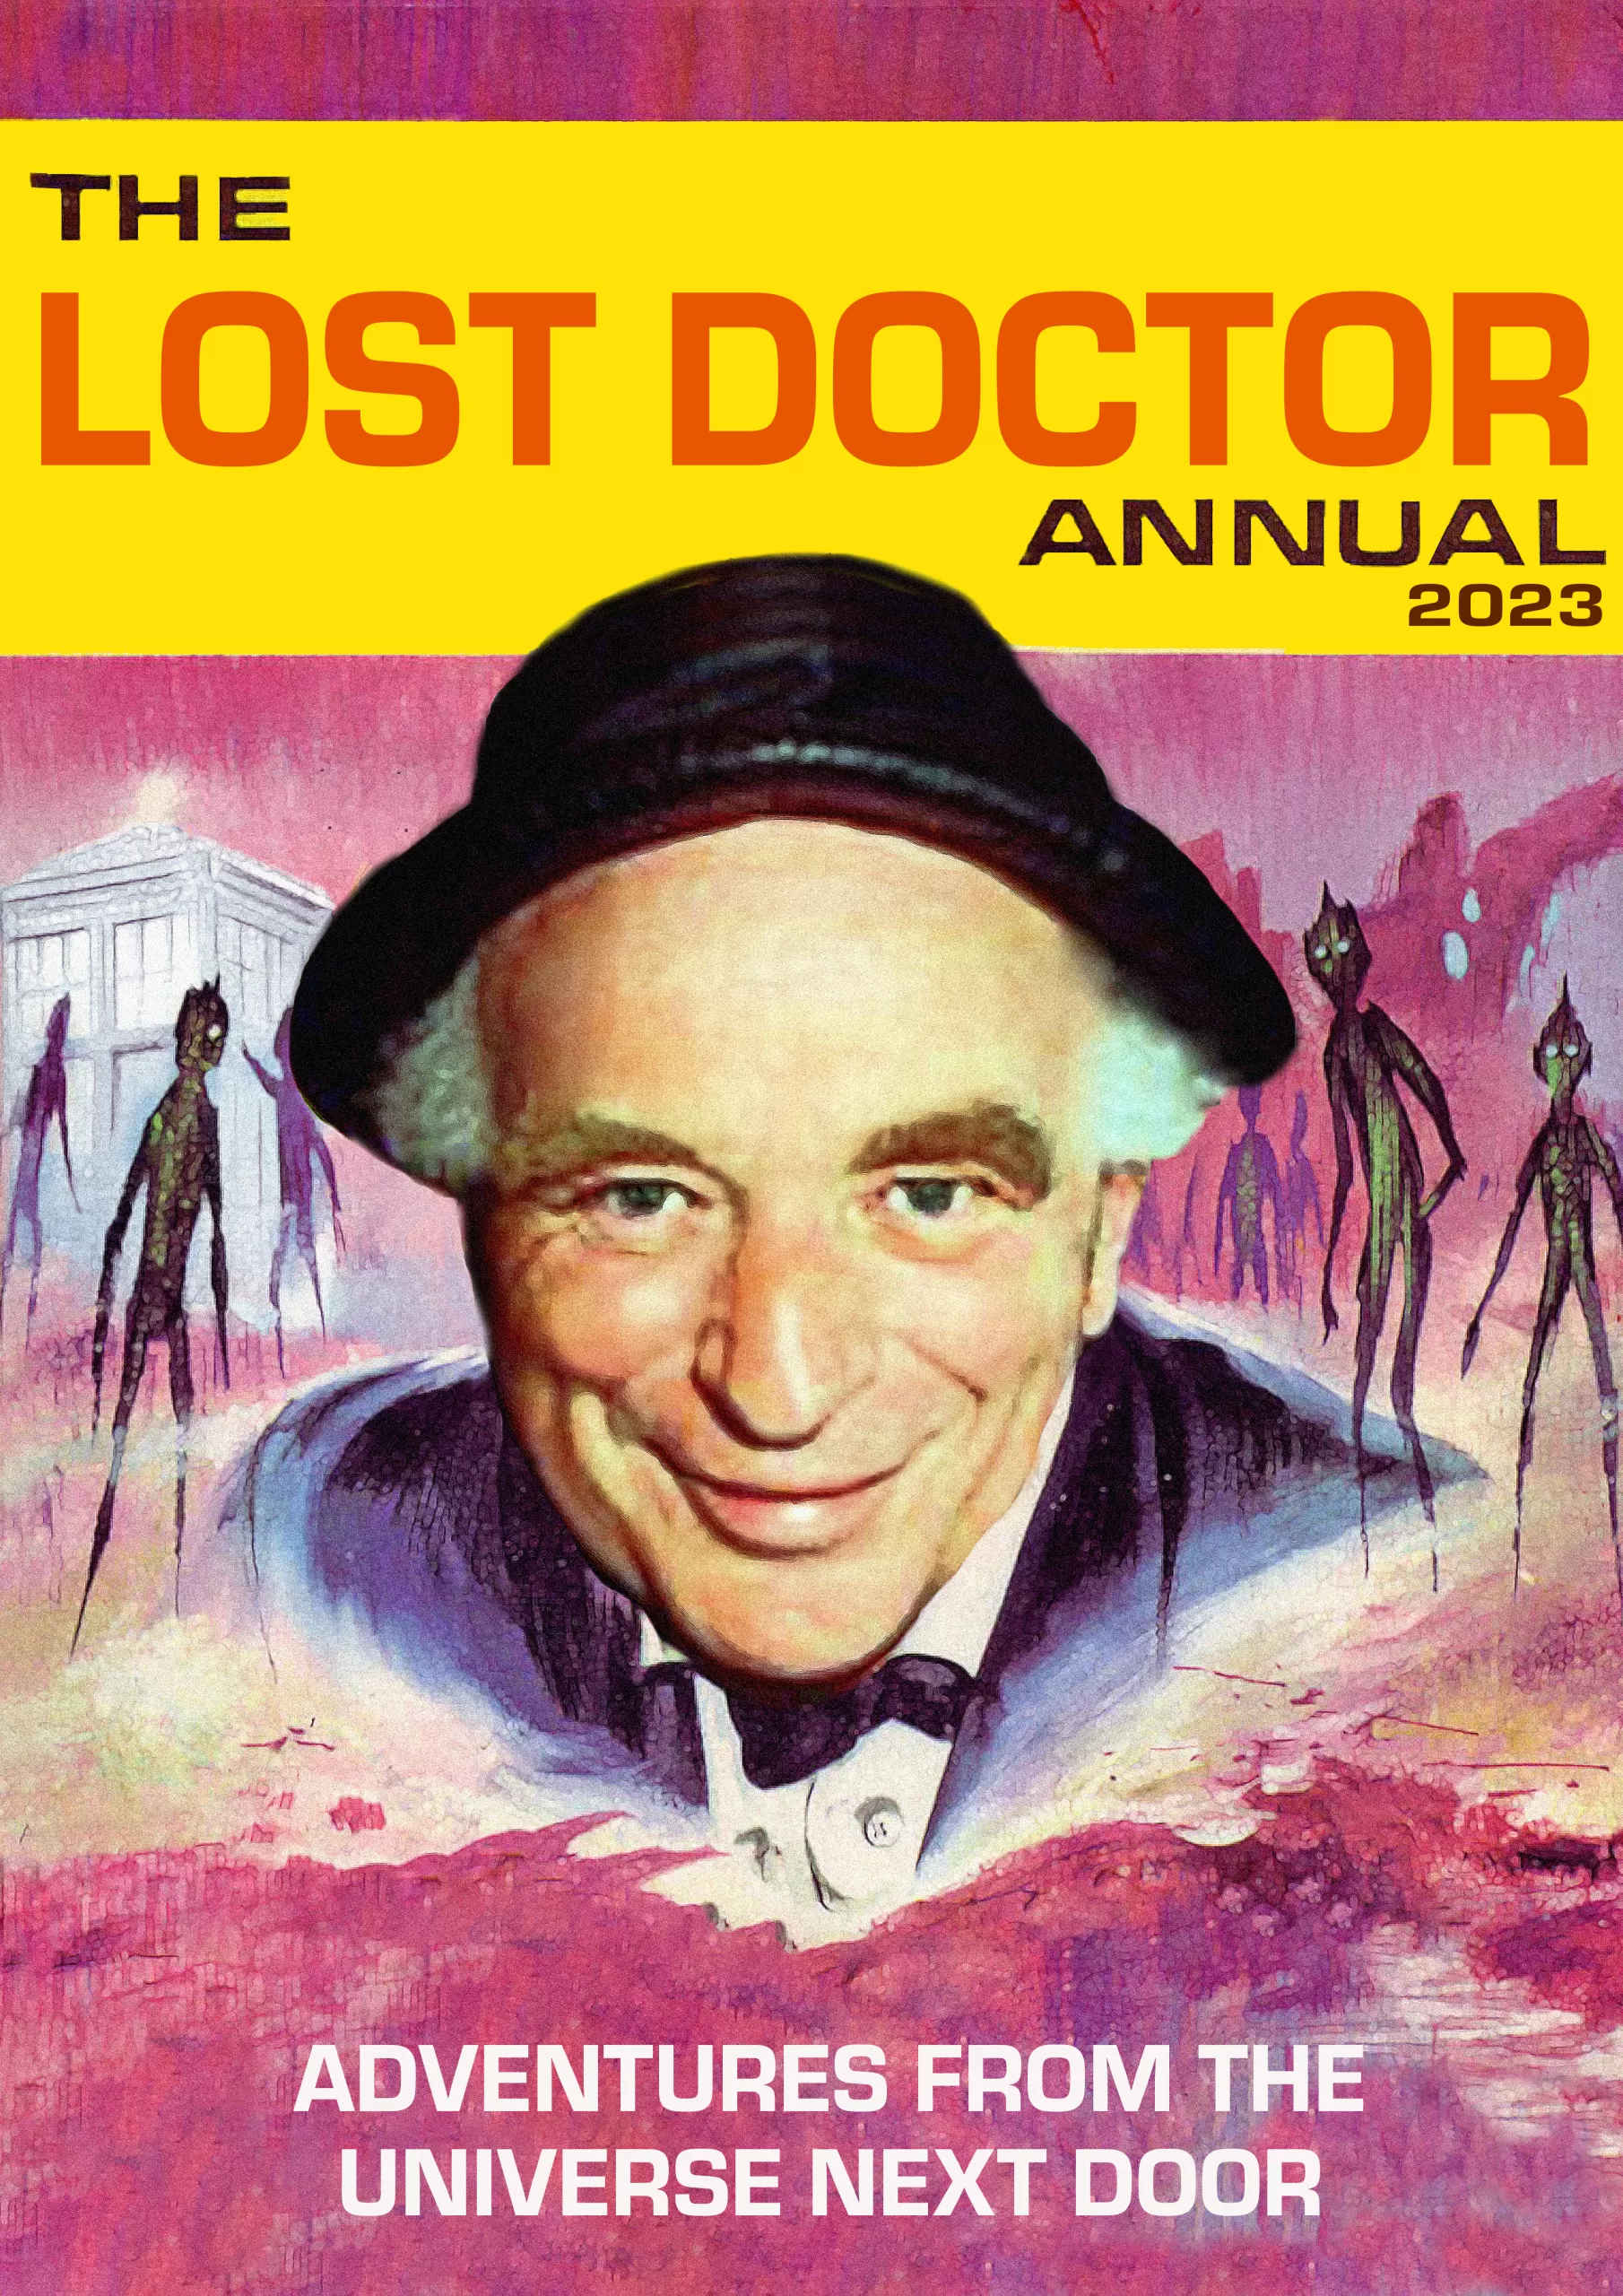 The Lost Doctor Annual